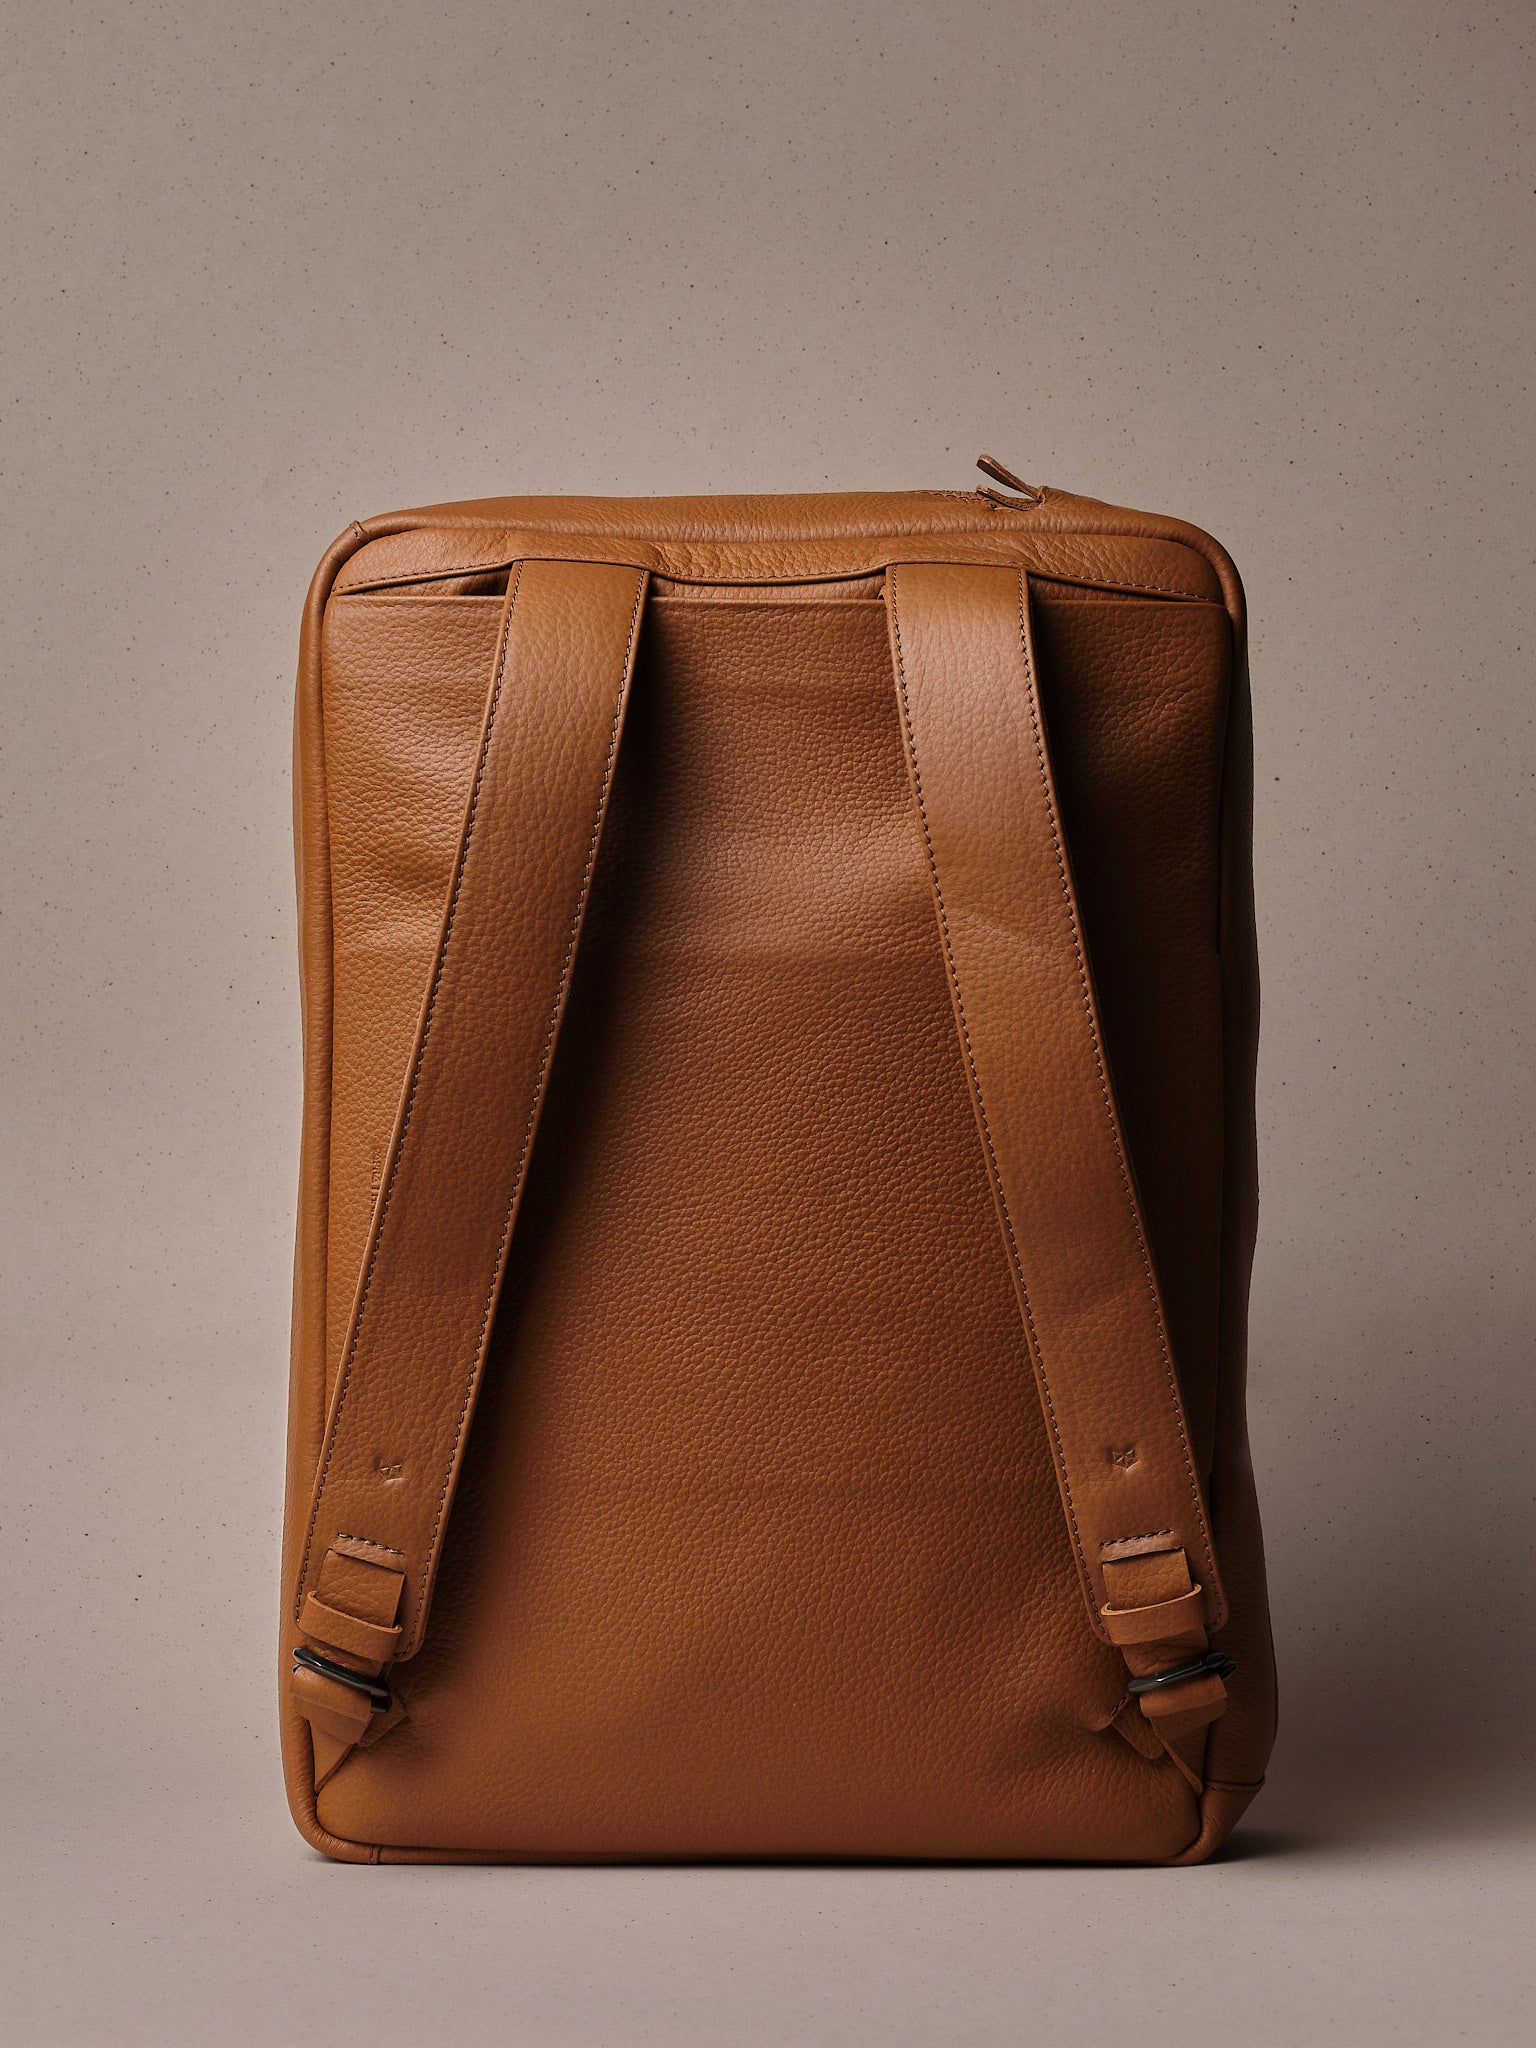 From Backpack to Briefcase. Tech Backpack Tan by Capra Leather